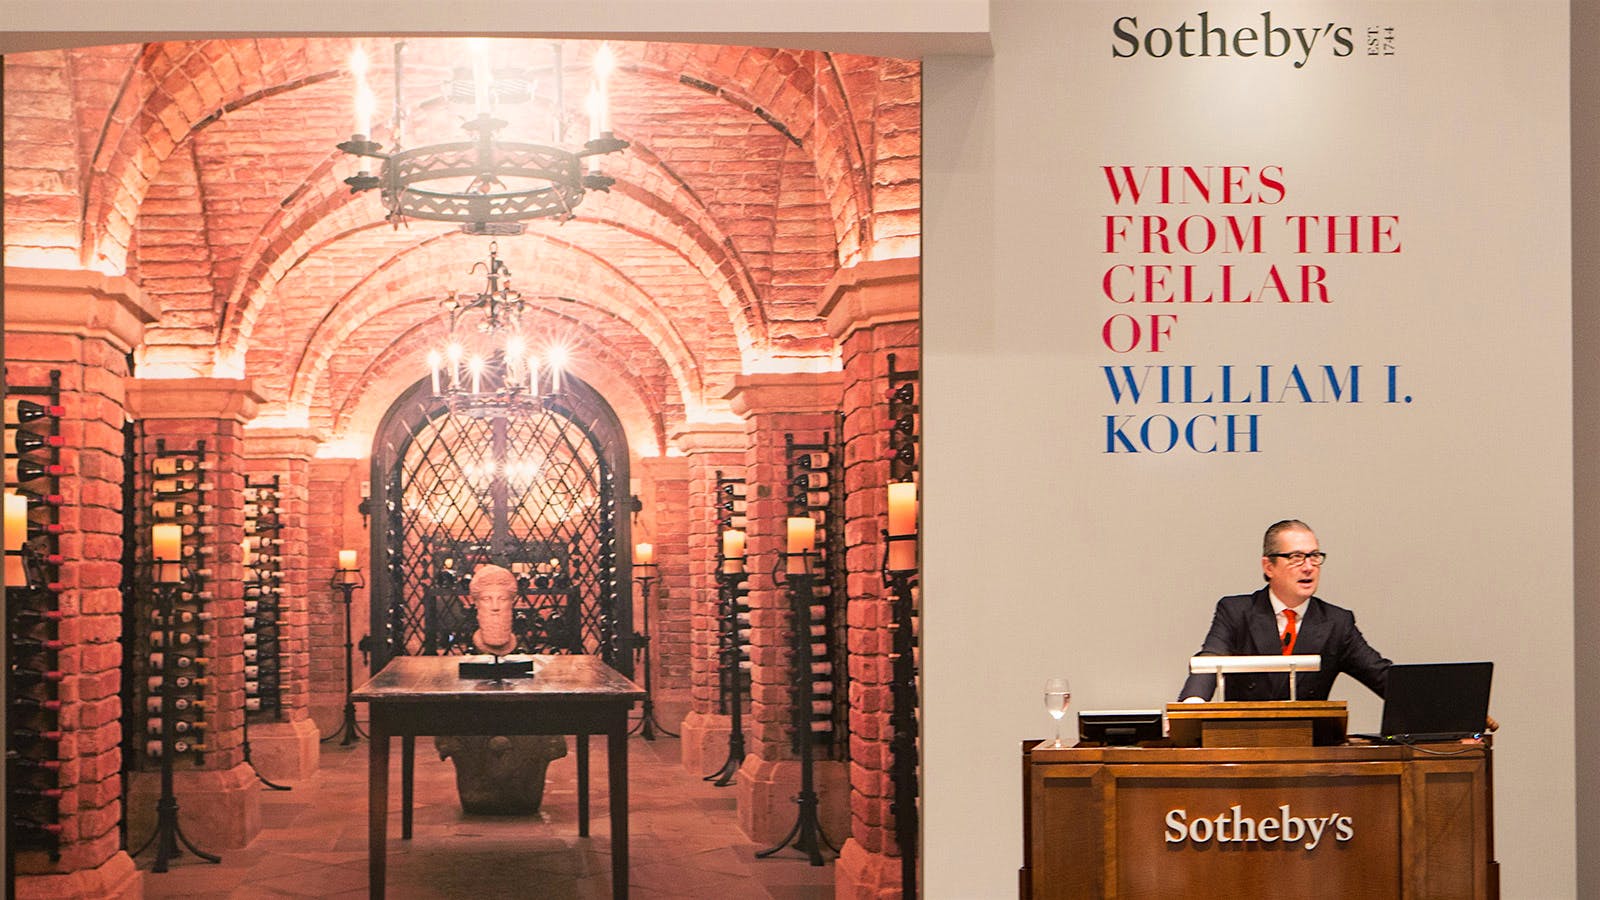 Sotheby’s Scores Big with Bill Koch's $21.9 Million Wine Auction